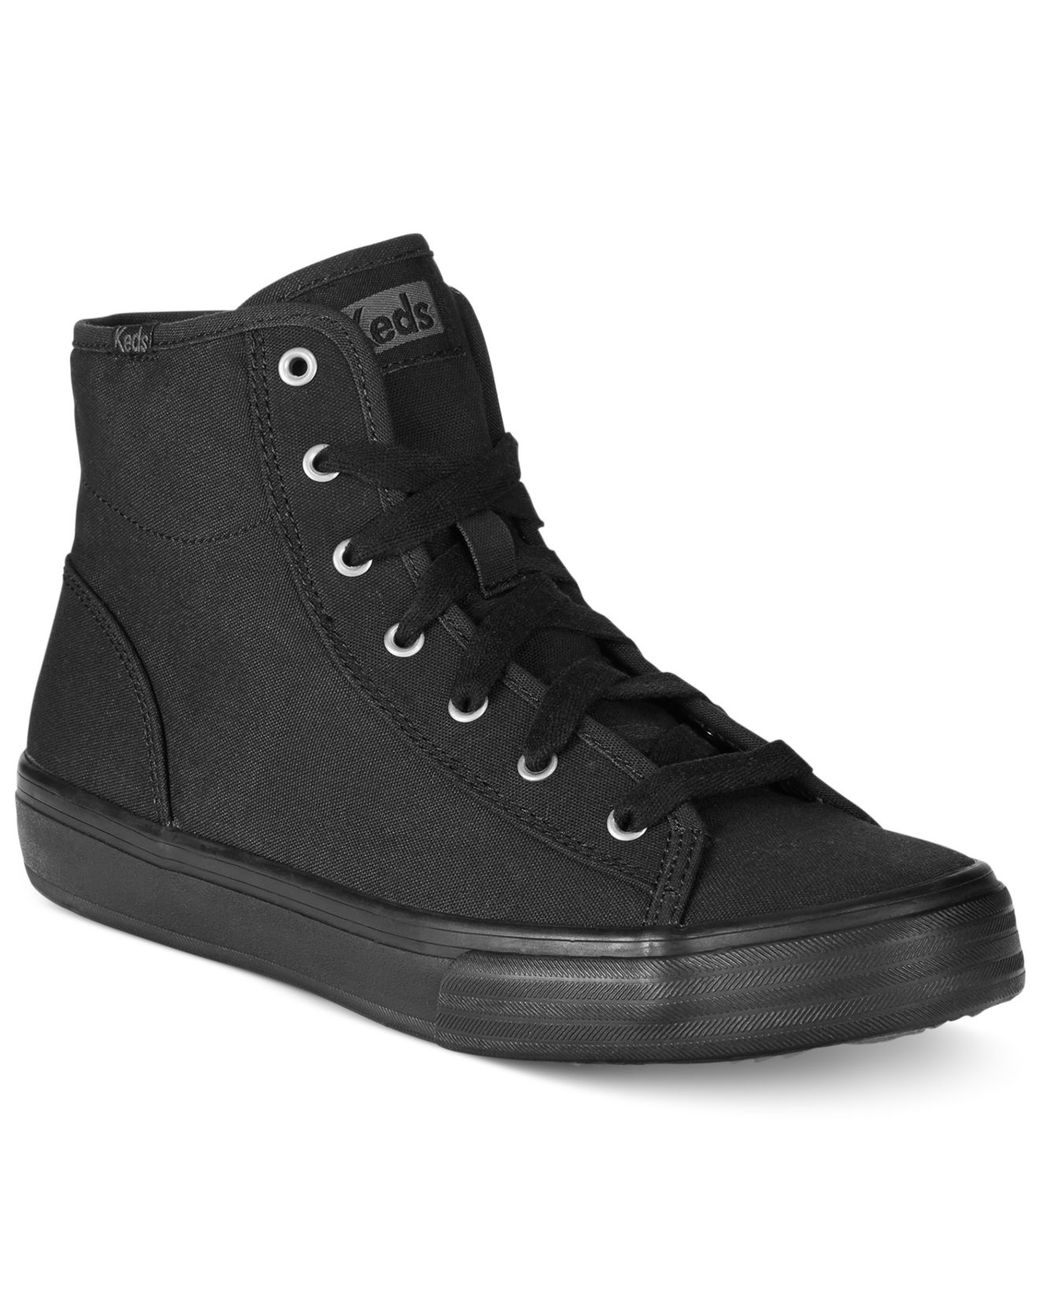 Keds Women'S Double Up High Top Sneakers in Black | Lyst